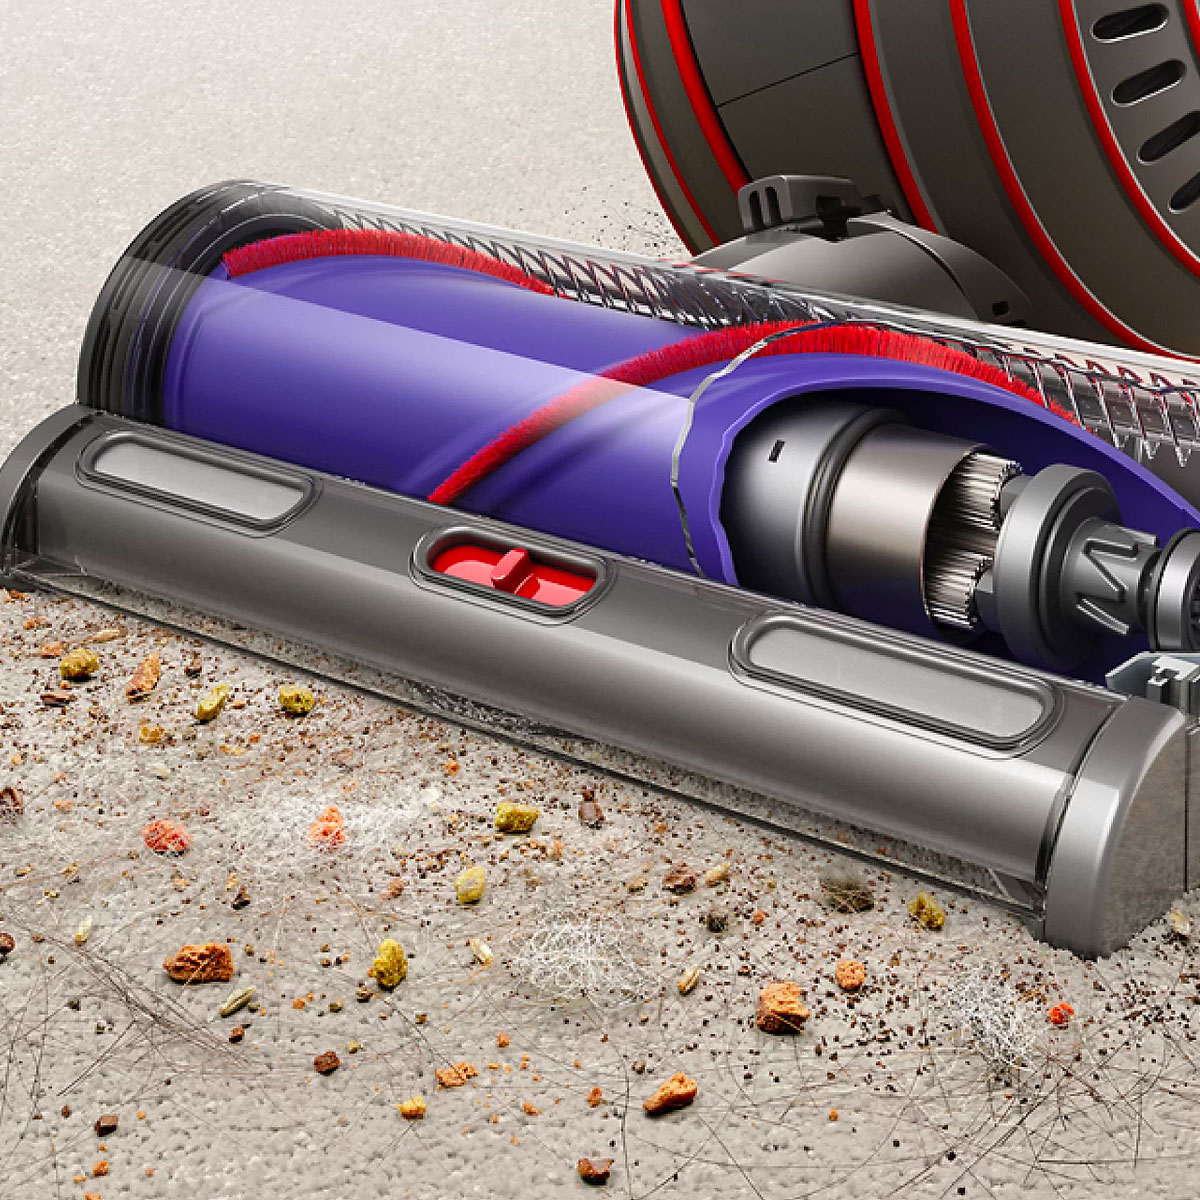 24-Hour Flash Deal: Save $225 on a Dyson Ball Upright Vacuum